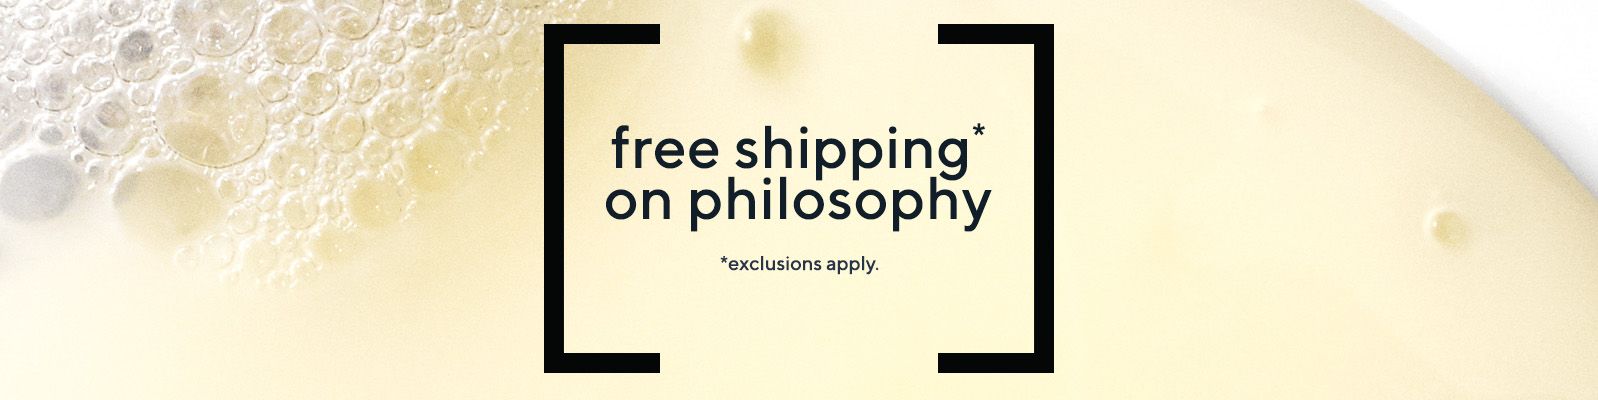 free shipping* on philosophy   *exclusions apply.